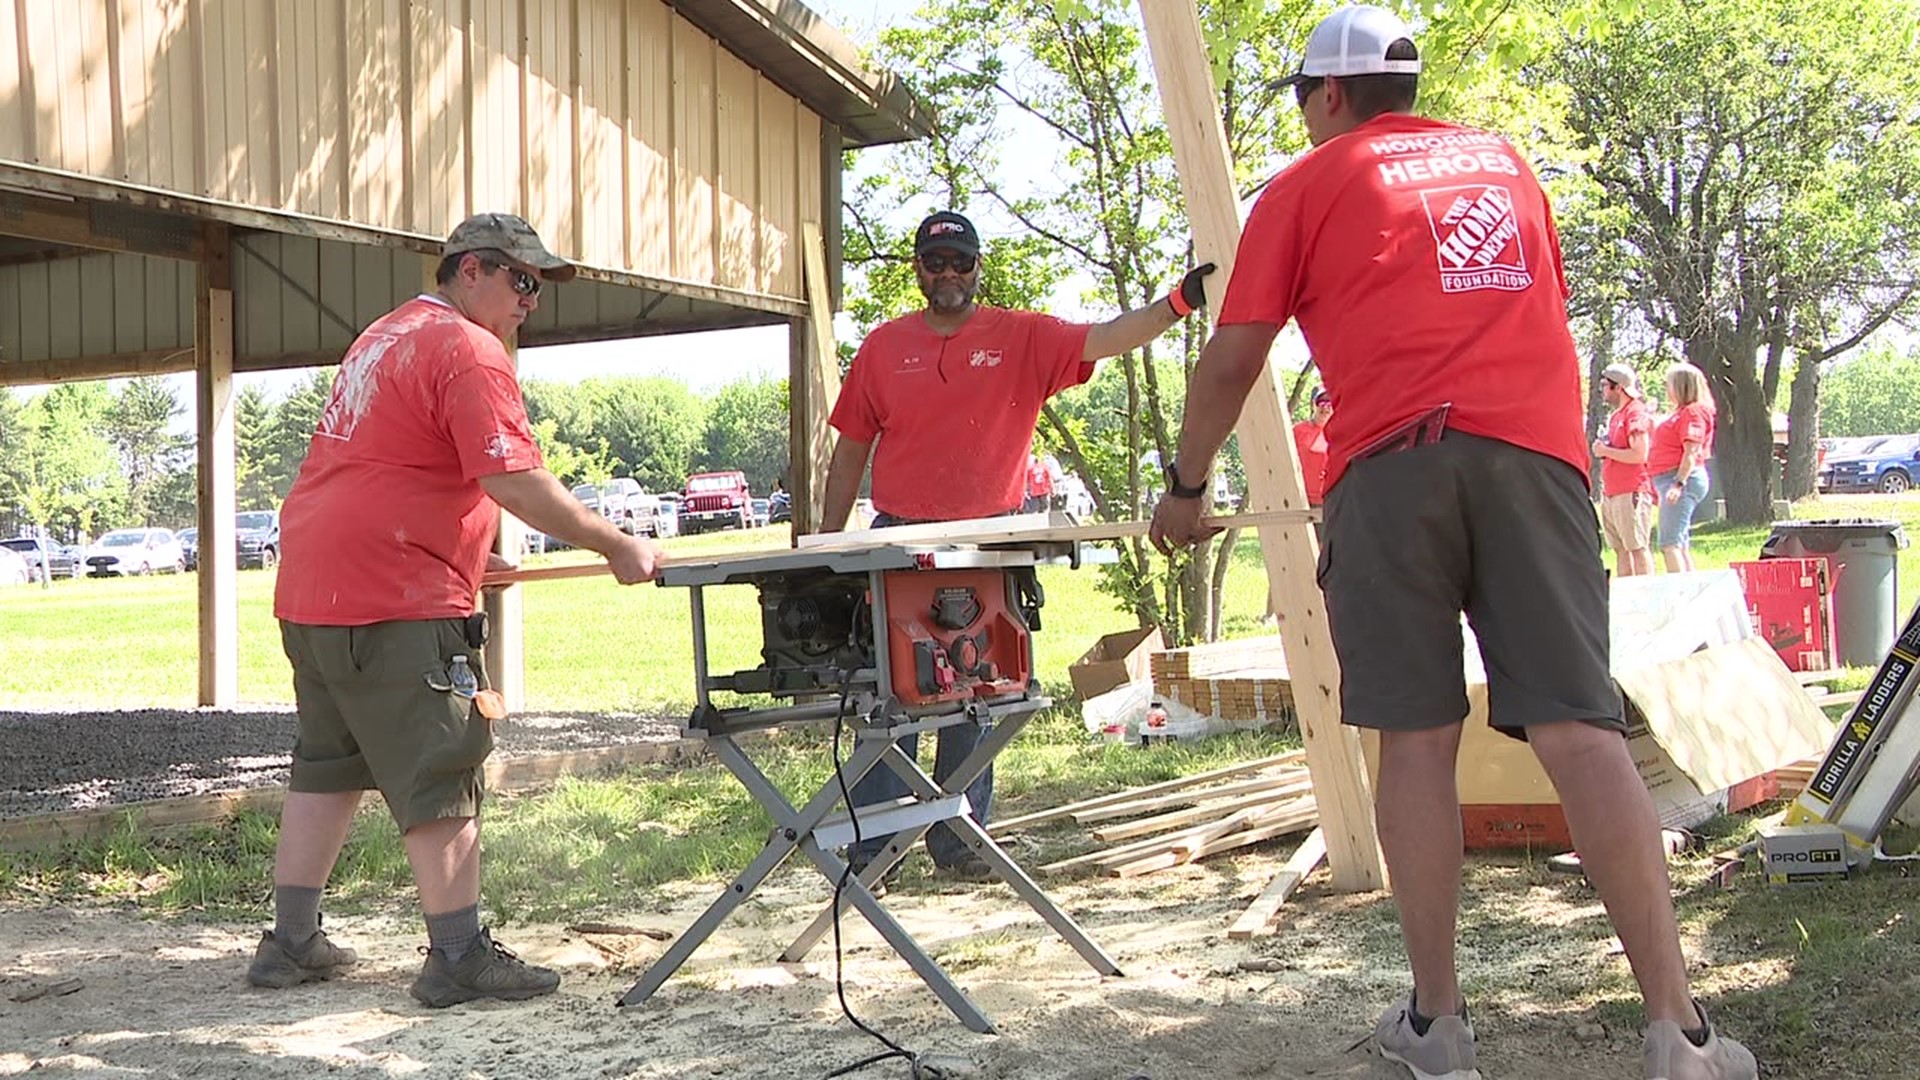 From building picnic tables to mulching and painting, Home Depot associates volunteer their time as part of the company's mission to help veteran causes.